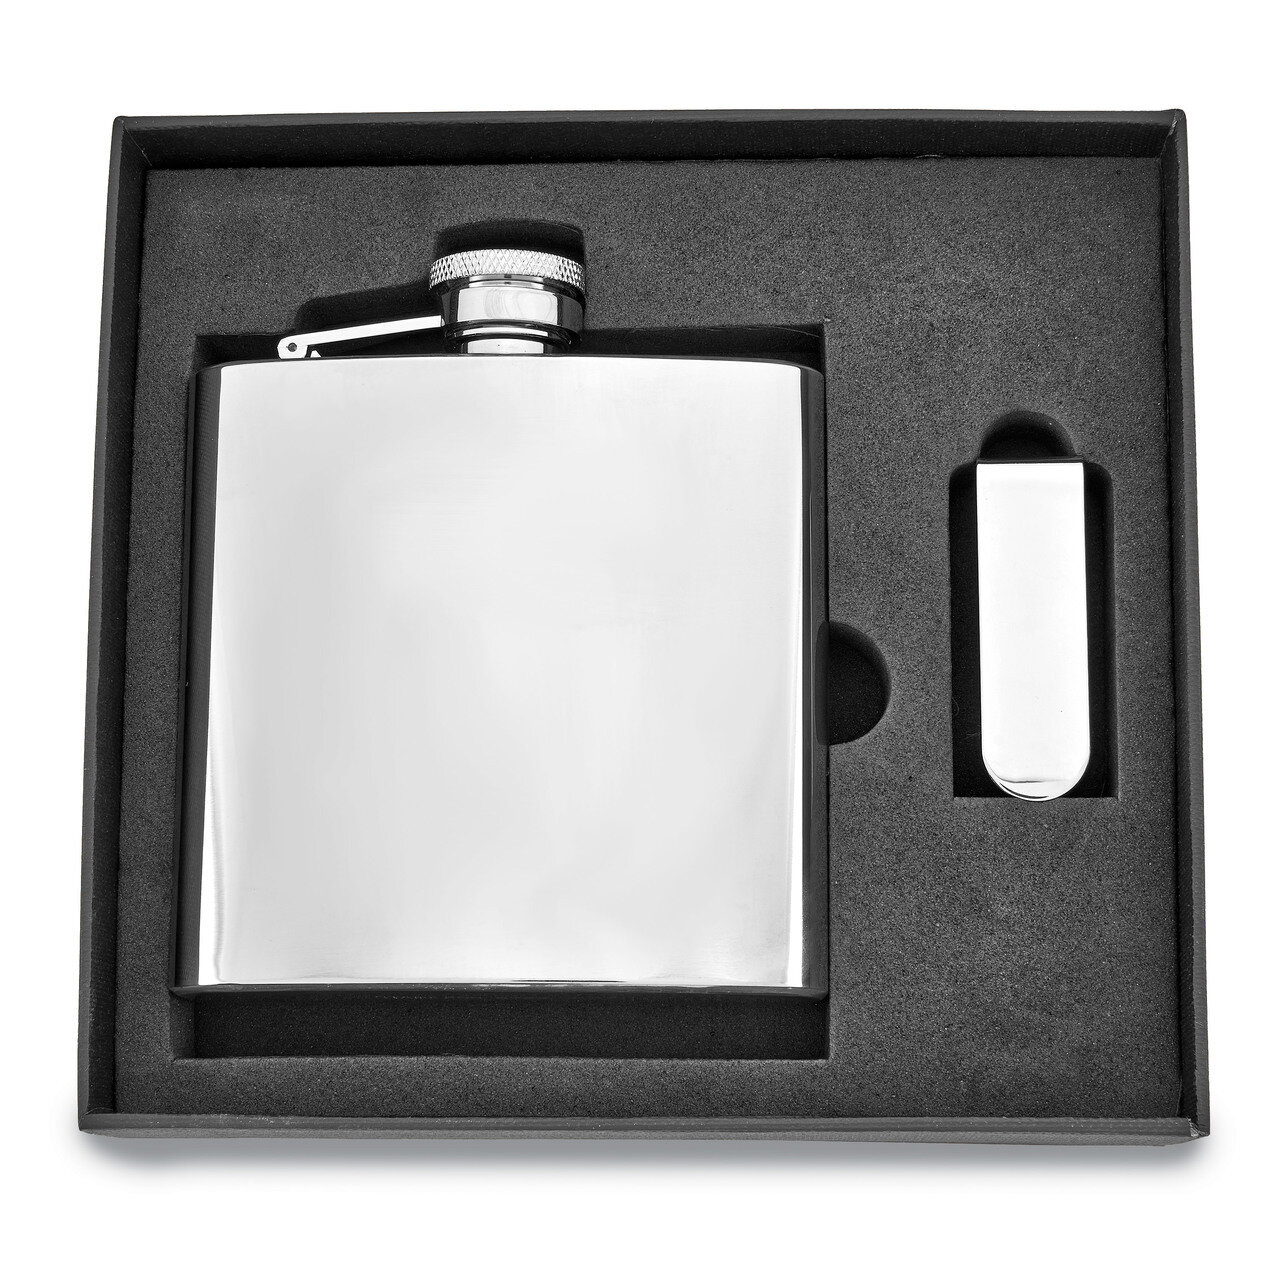 6 oz. Stainless Steel Flask and Money Clip Gift Set GM2714